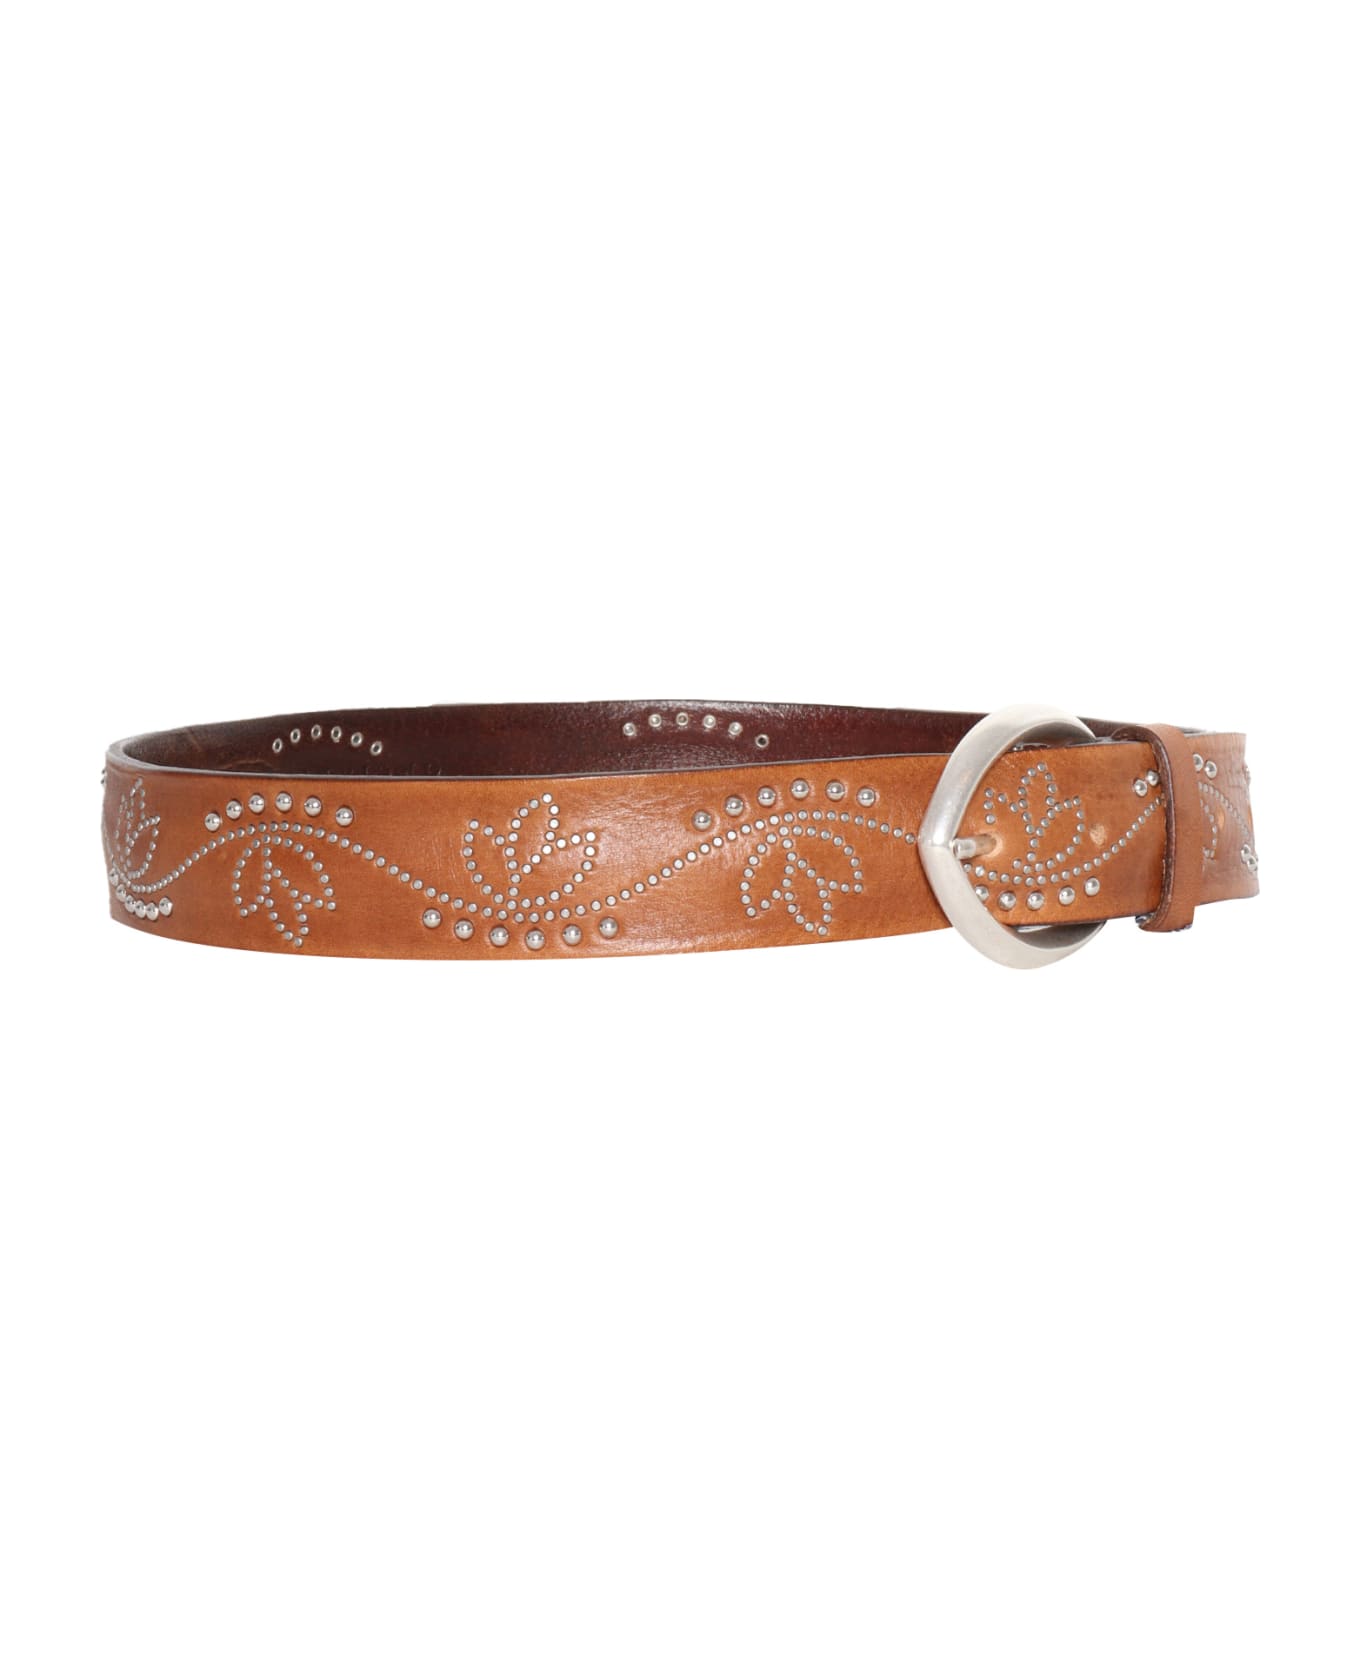 Orciani Leather Belt With Studs - BROWN